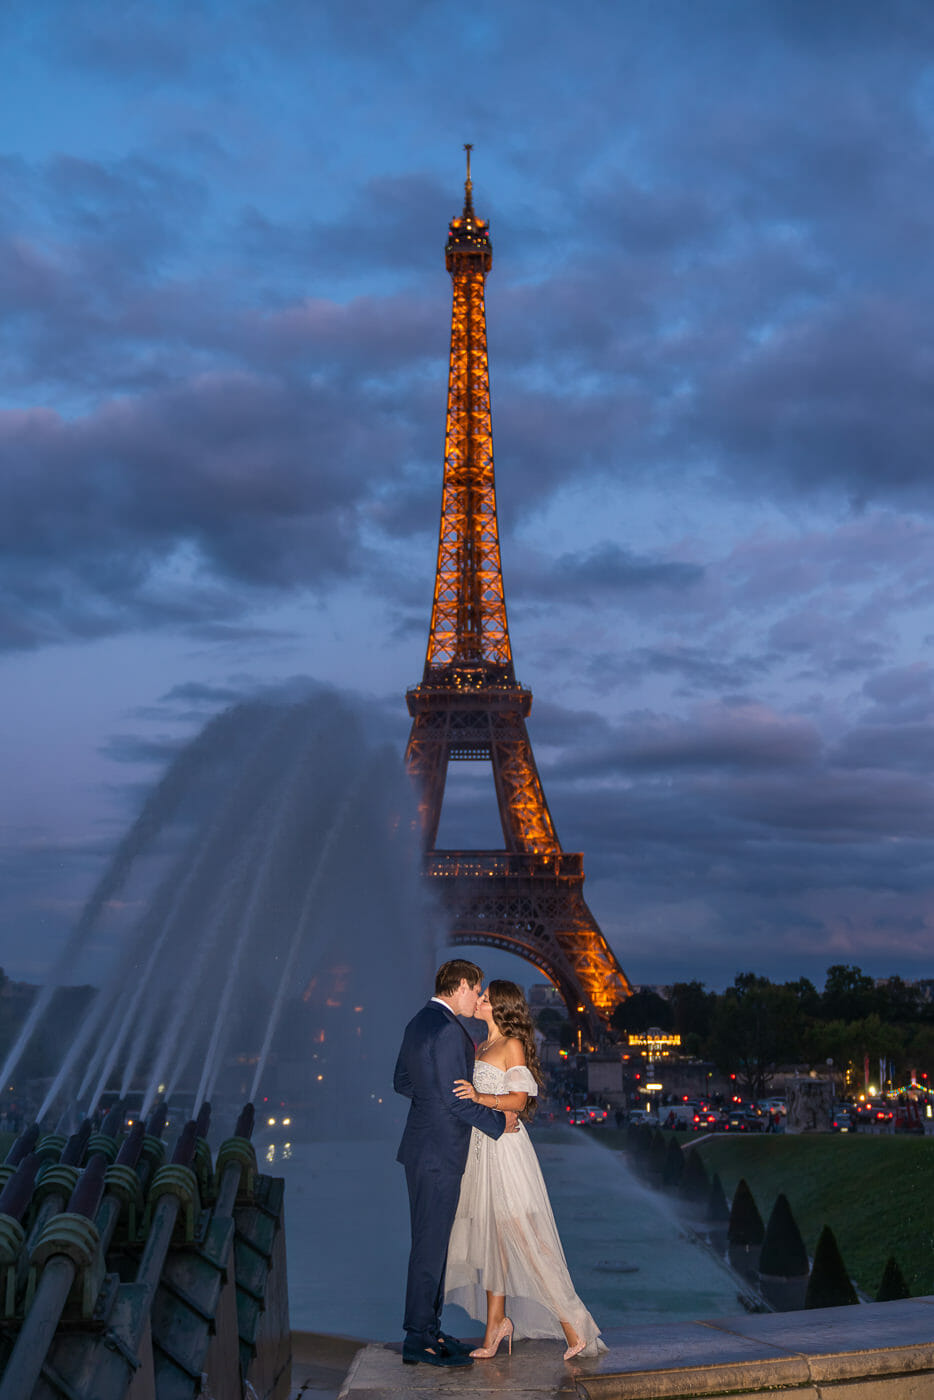 Eiffel Tower couple pictures at night at Trocadero